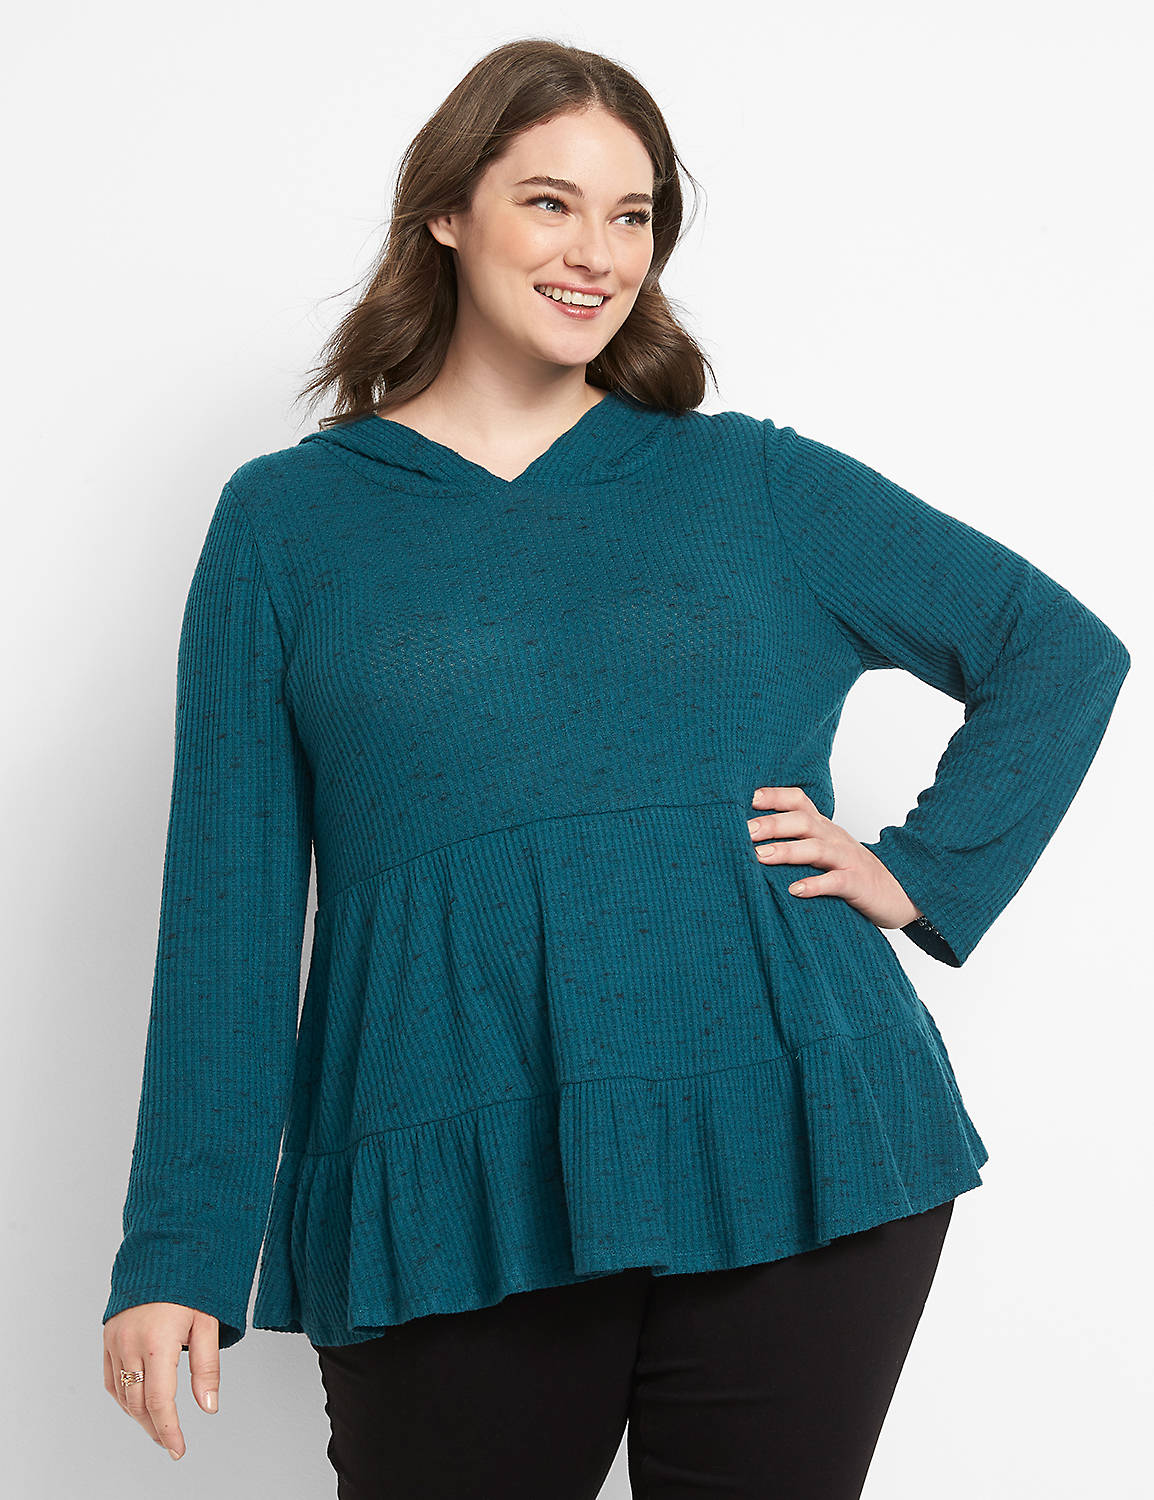 Long Sleeve Hooded Tiered Tunic Knit Top In Waffle Fabric 1123635:PANTONE Deep Teal:10/12 Product Image 1